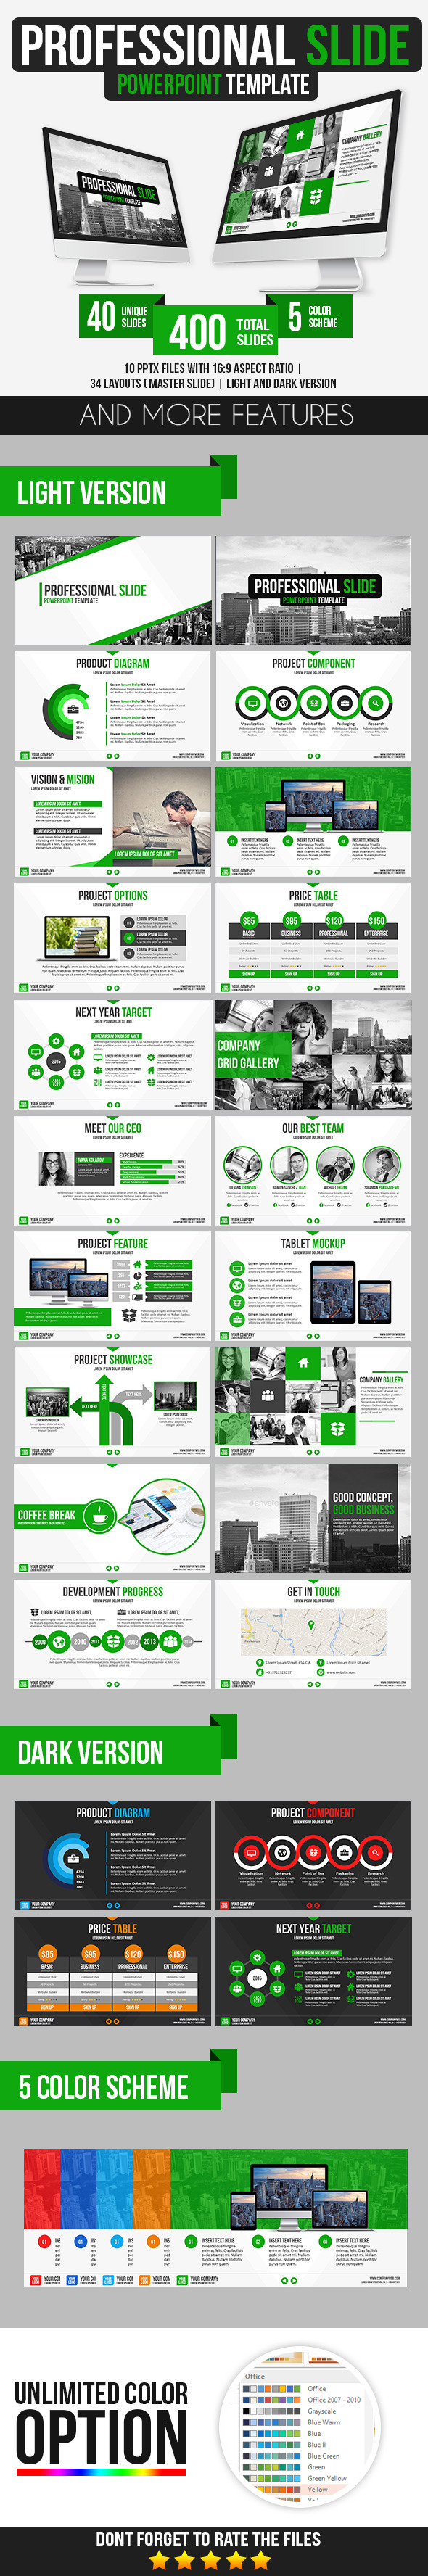 Professional Slide PowerPoint Template